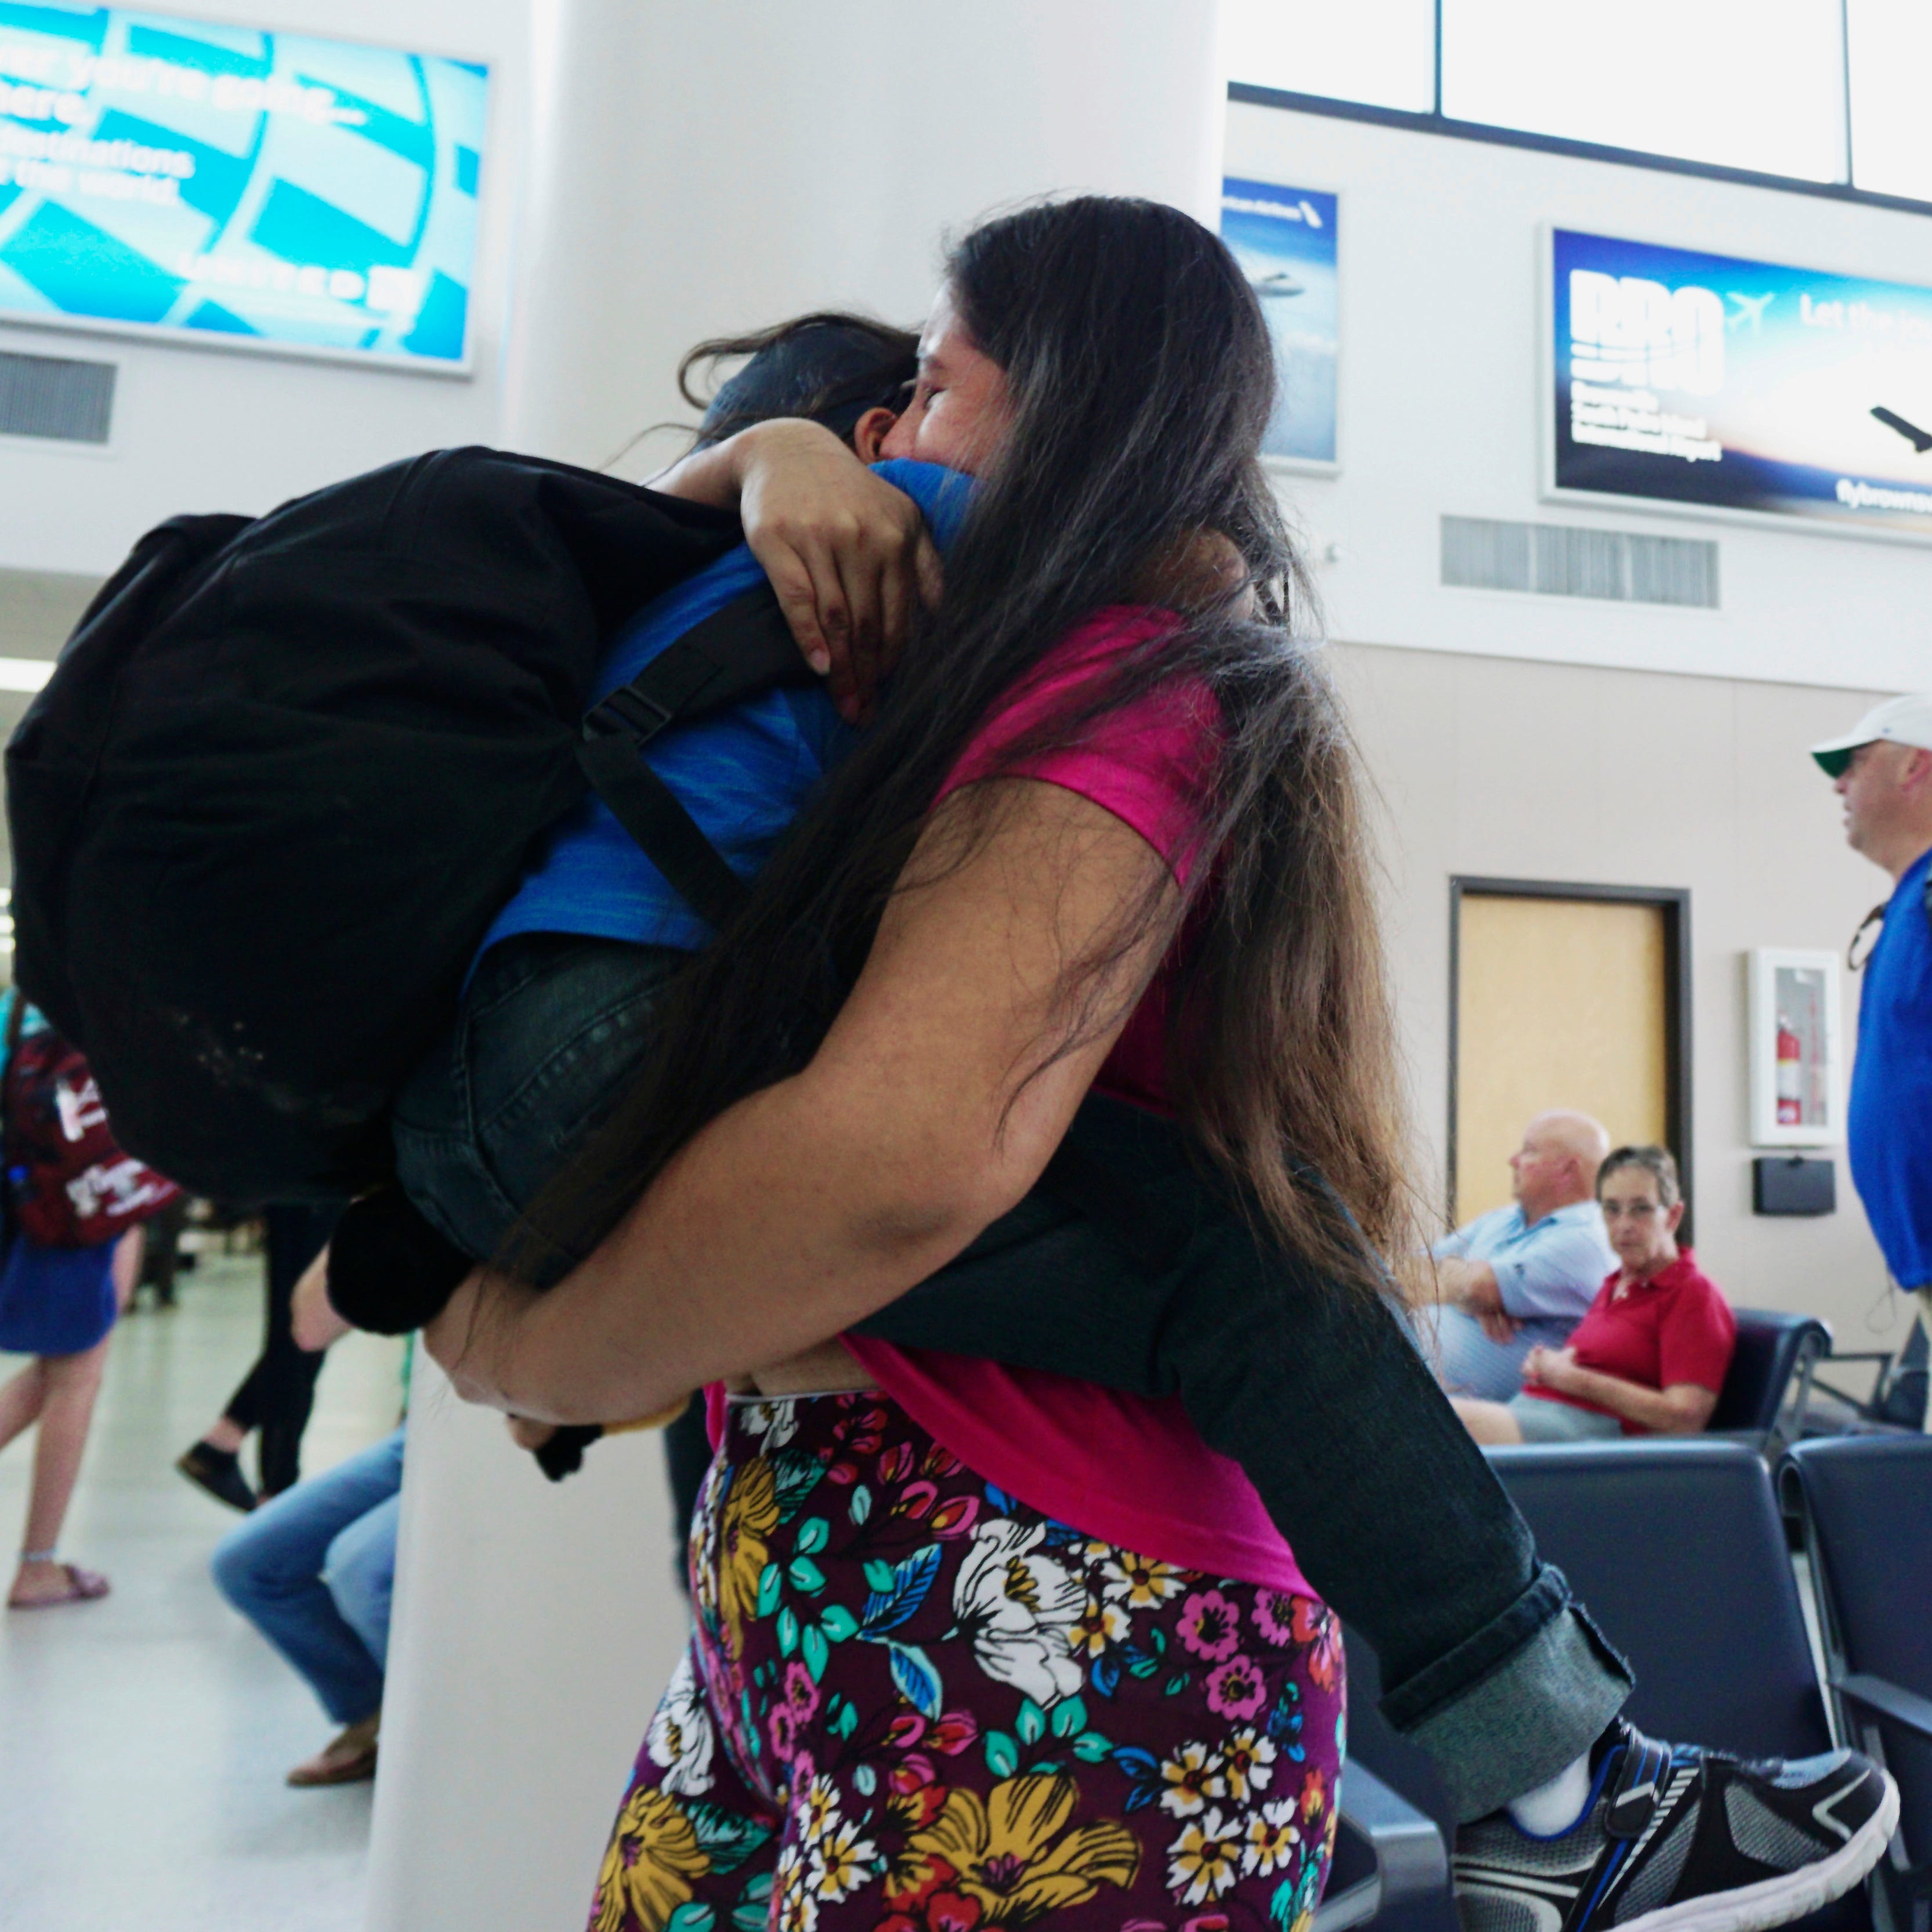 Twenty-four-year-old Dunia of Honduras embraces her 5-year-old son Wuilman at Brownsville South Padre Island International Airport in Brownsville, Texas, on July 20, 2018, as they were reunited after being separated from each other for more than 30 d